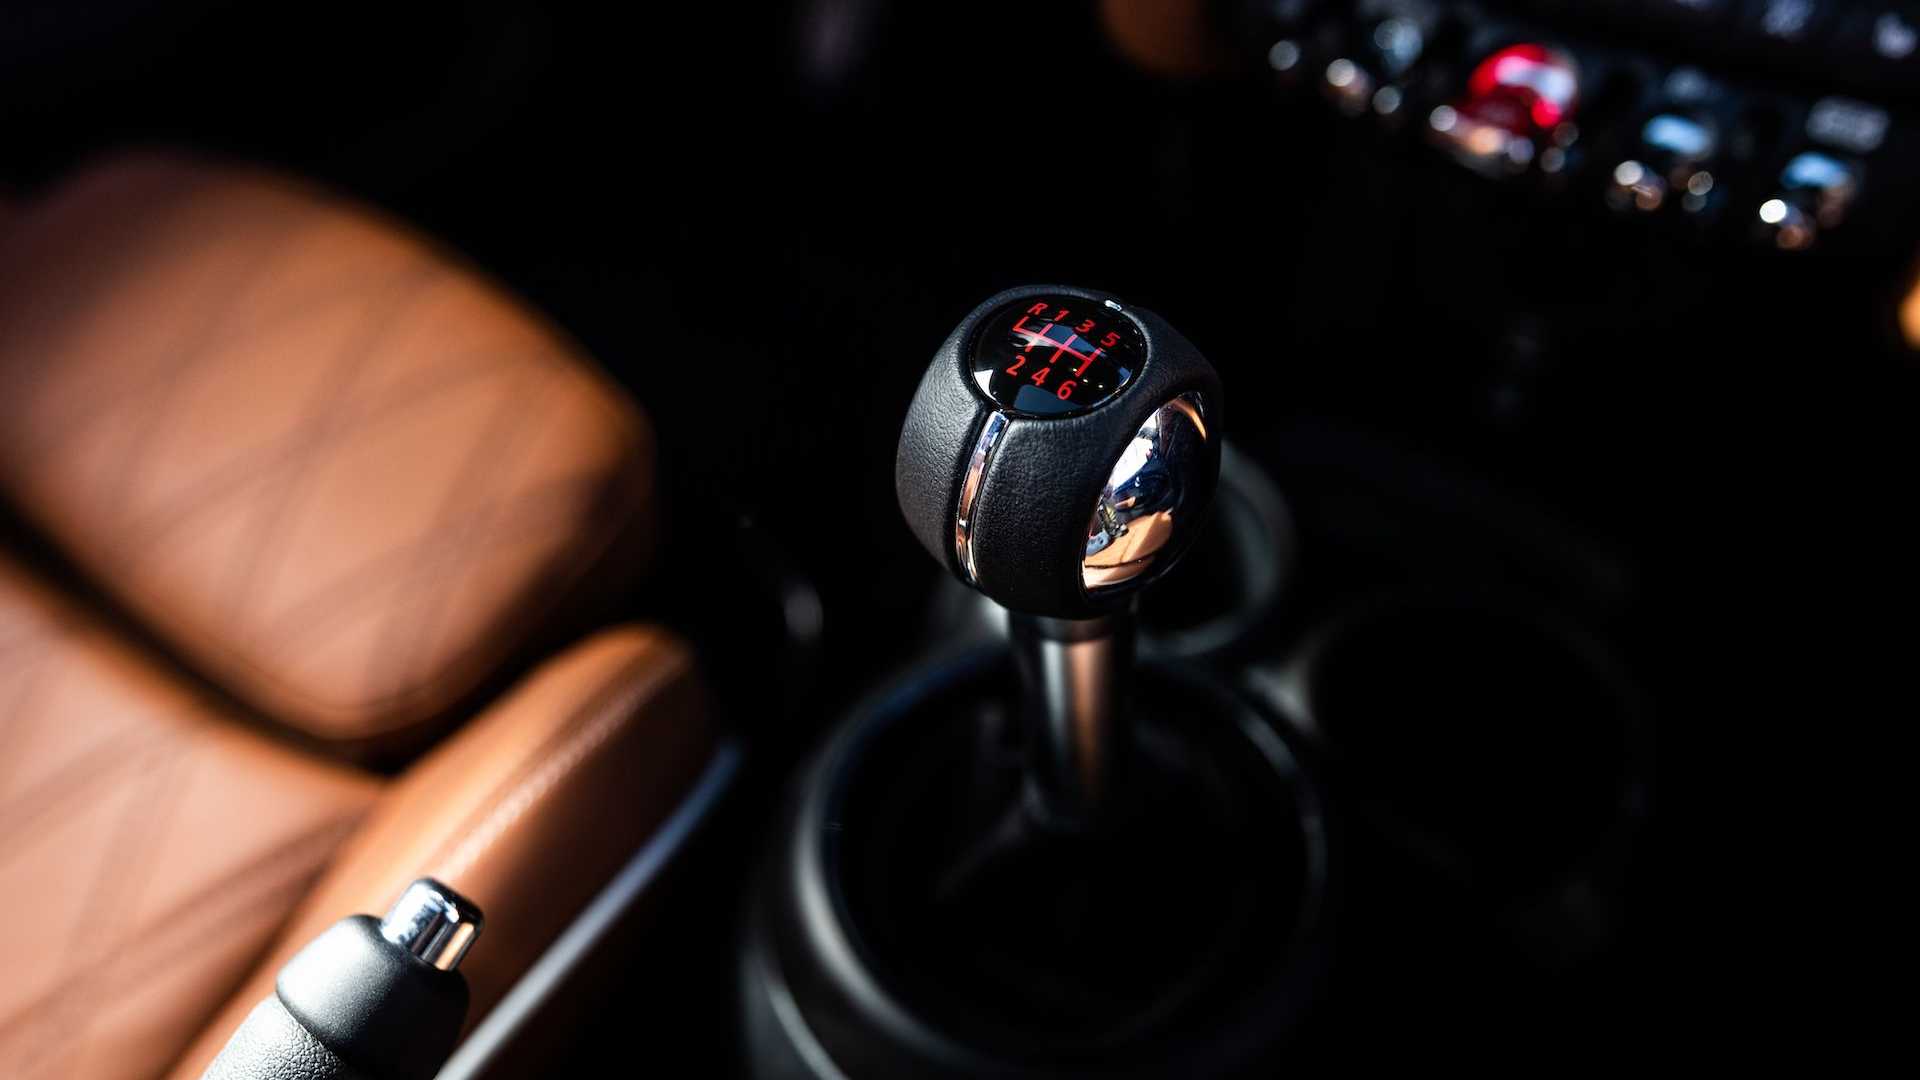 Mini Announces More "Fun To Drive" Manual Transmission Models For The US